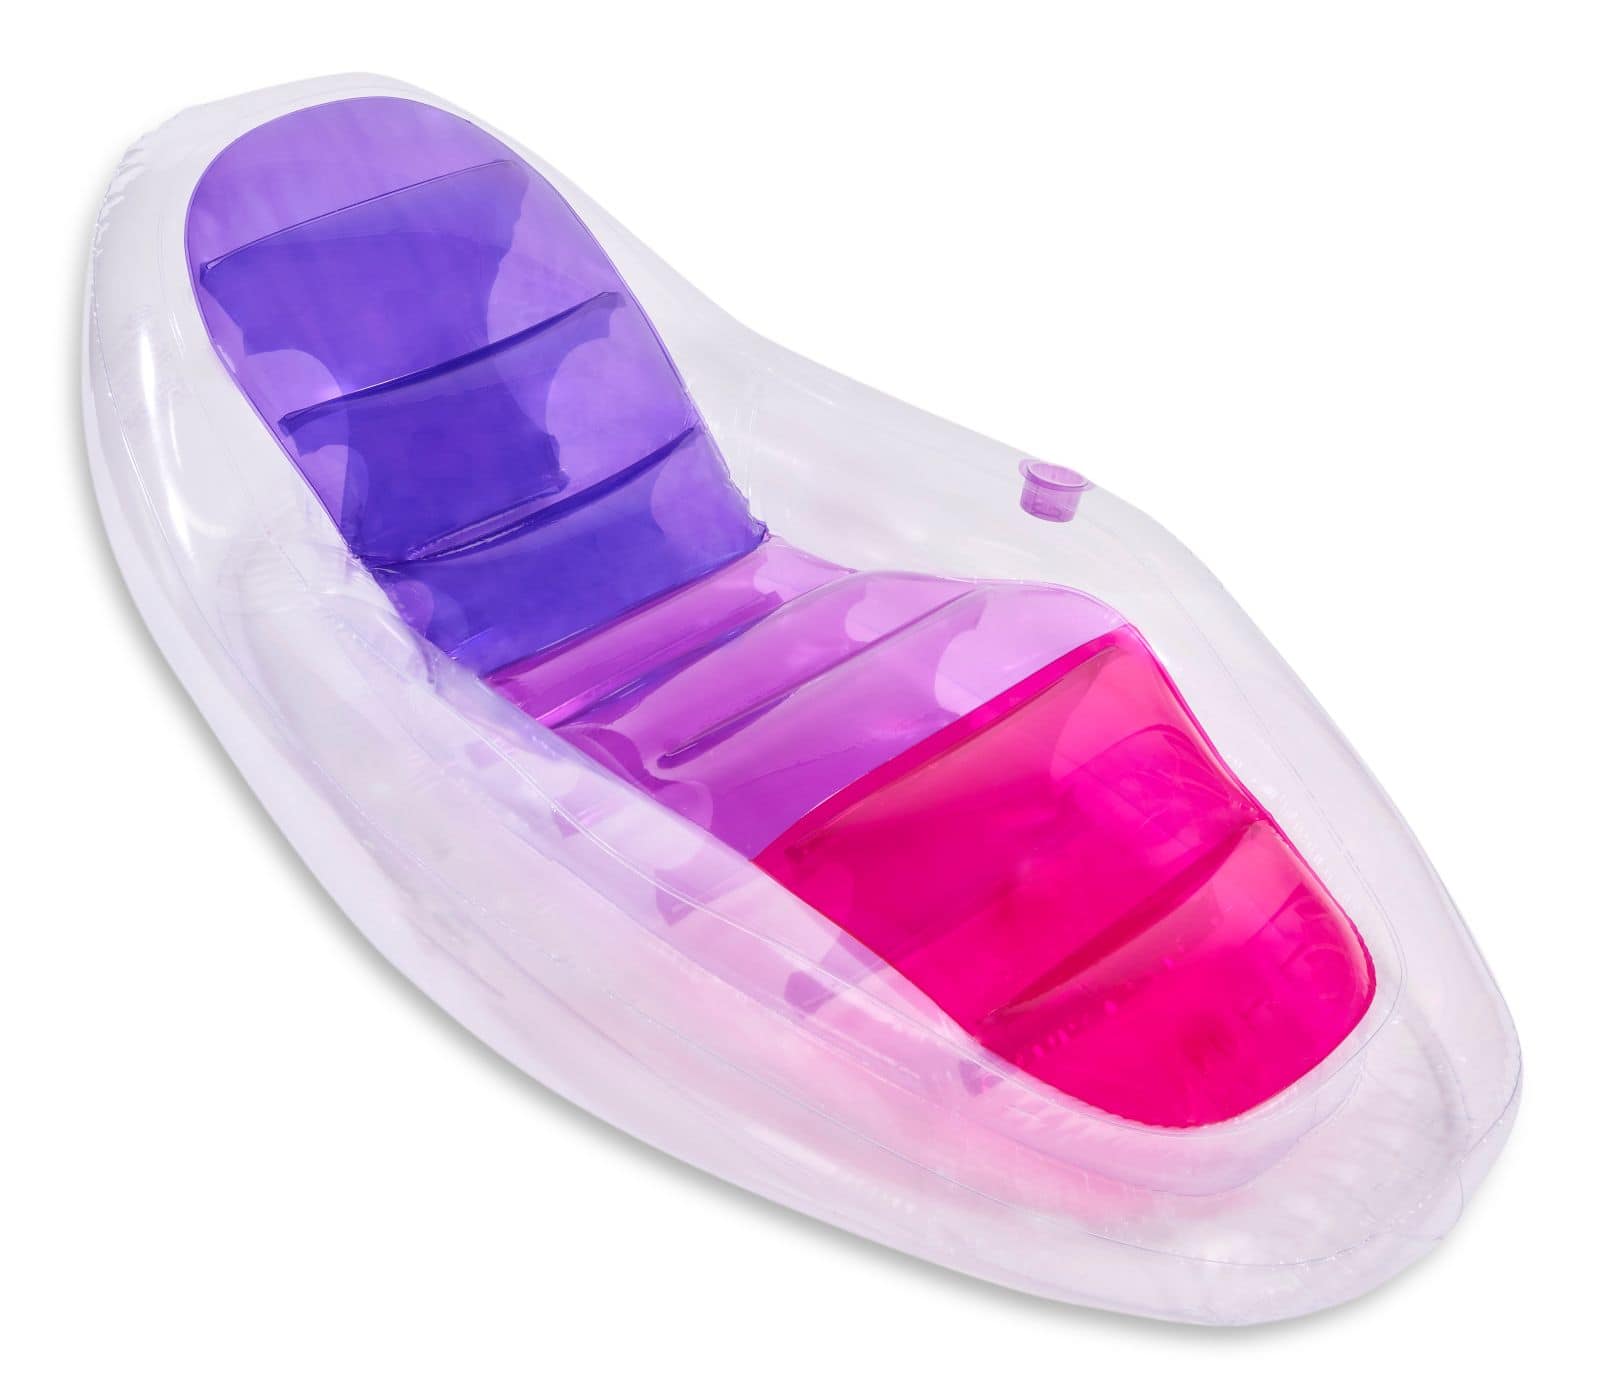 Swimways Dry Float Inflatable Lazy Pool Float/Lounger, 79 x 41-in